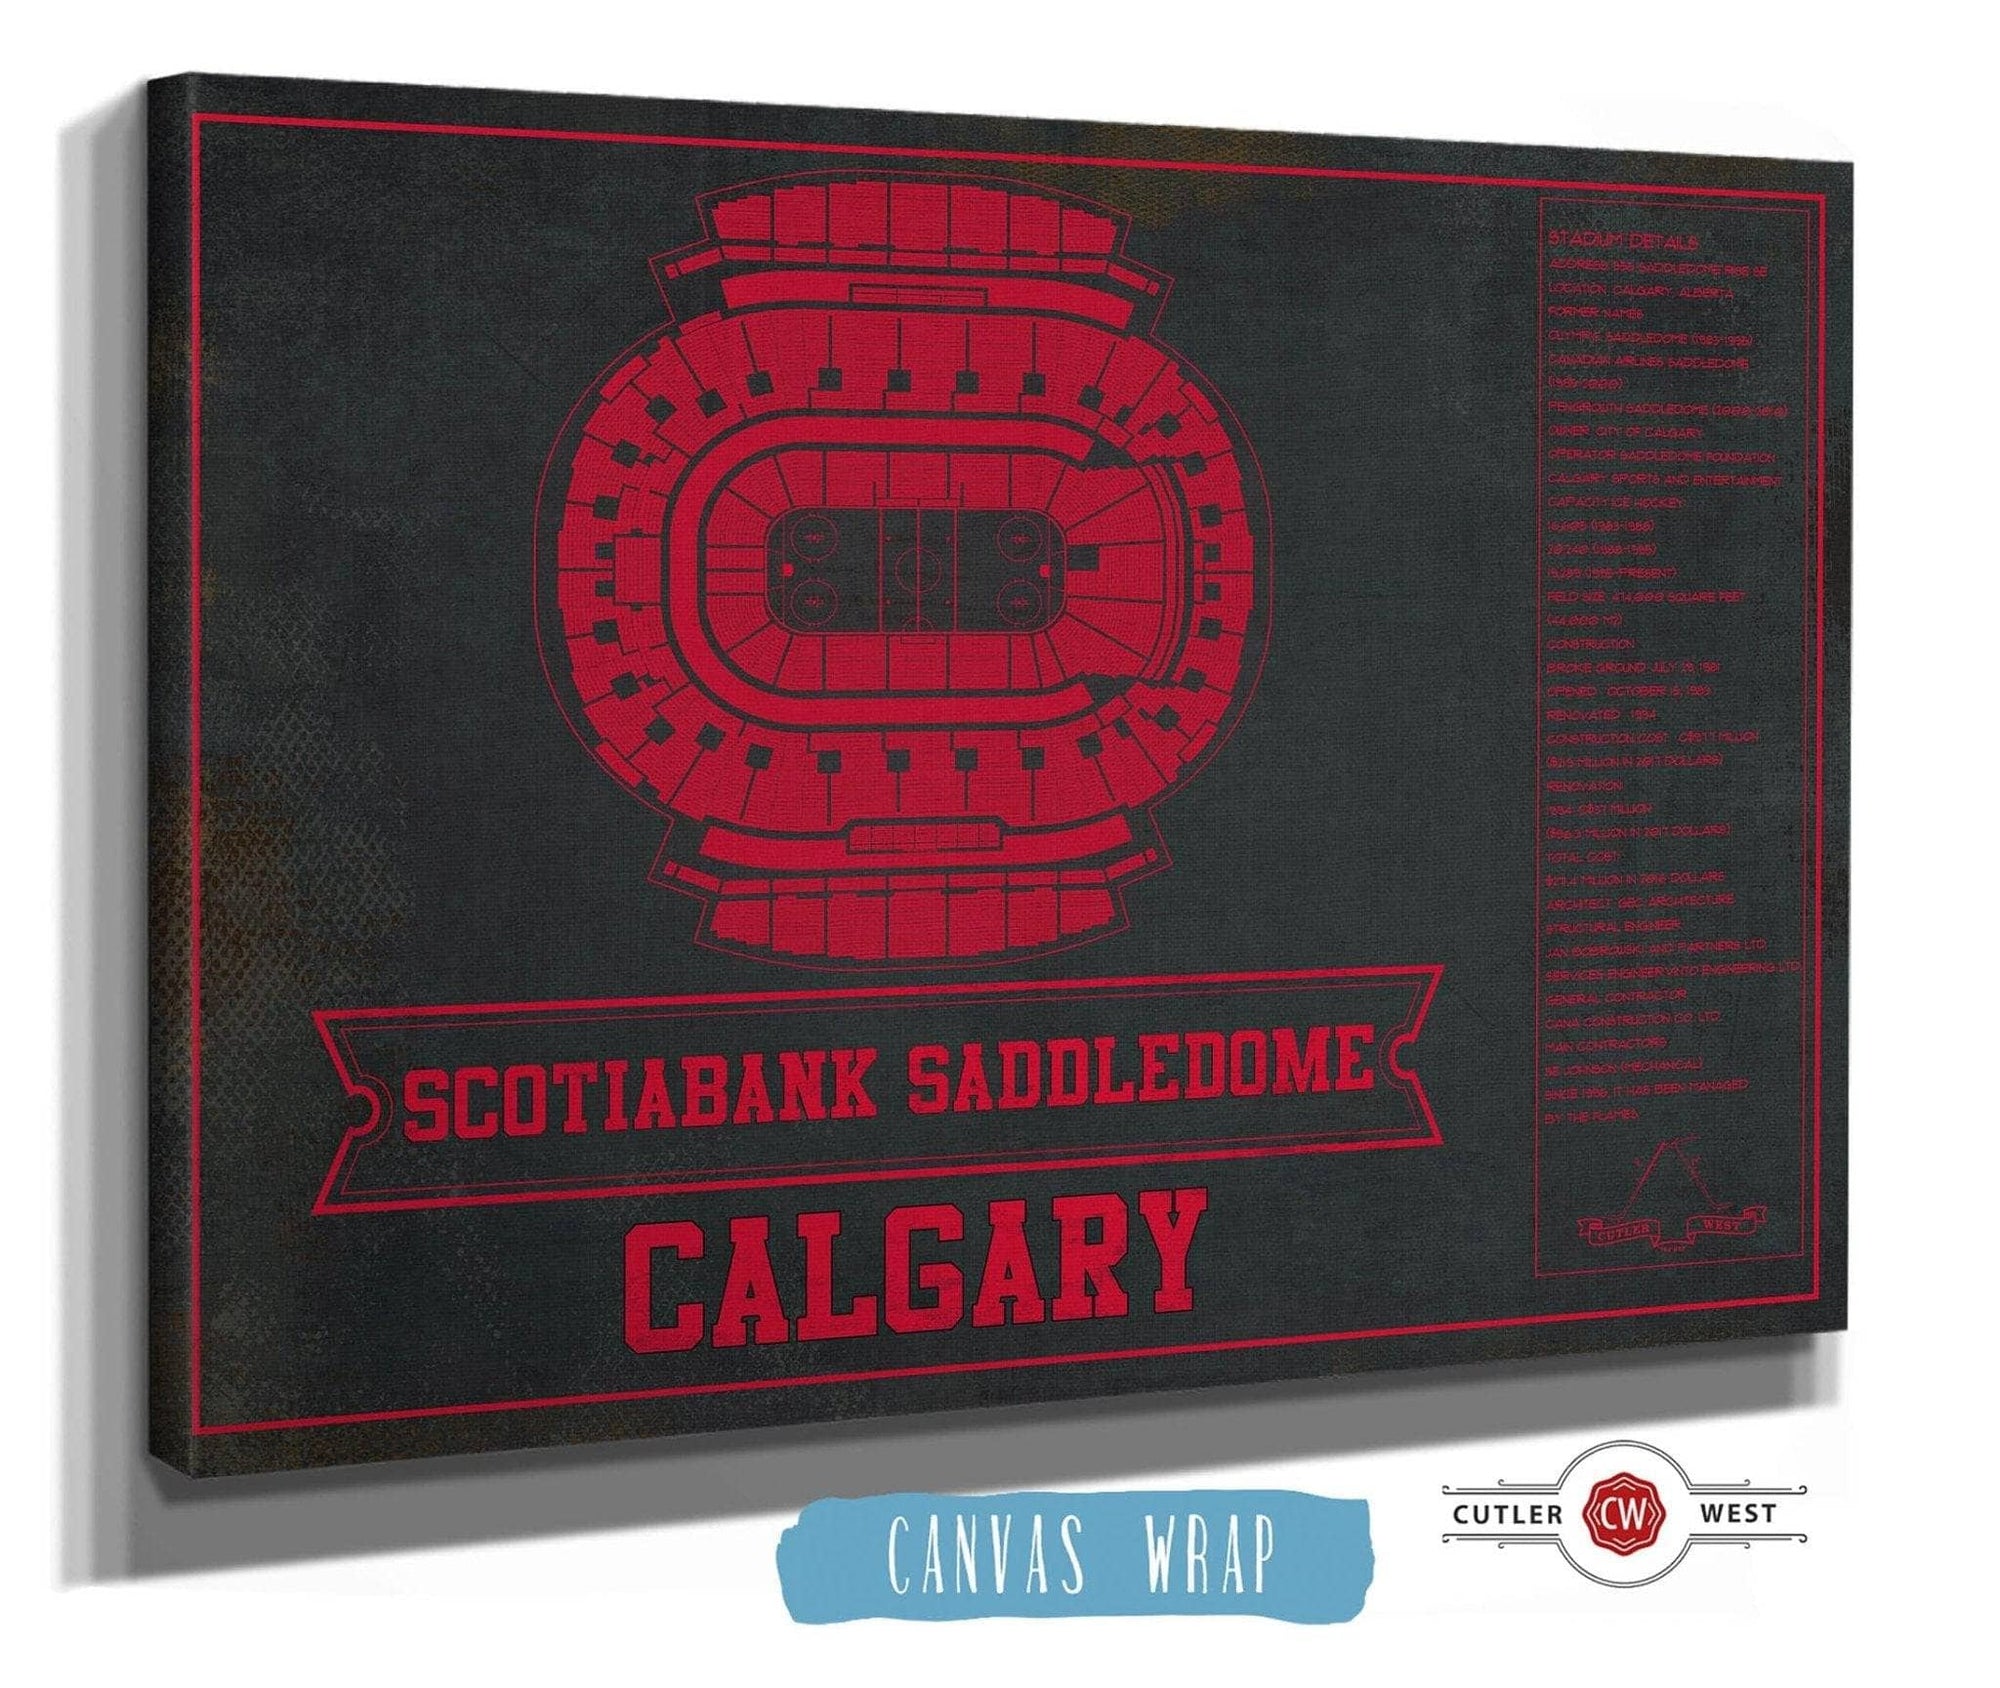 Cutler West 14" x 11" / Stretched Canvas Wrap Calgary Flames Scotiabank Saddledome Seating Chart - Vintage Hockey Team Color Print 673818887-TEAM